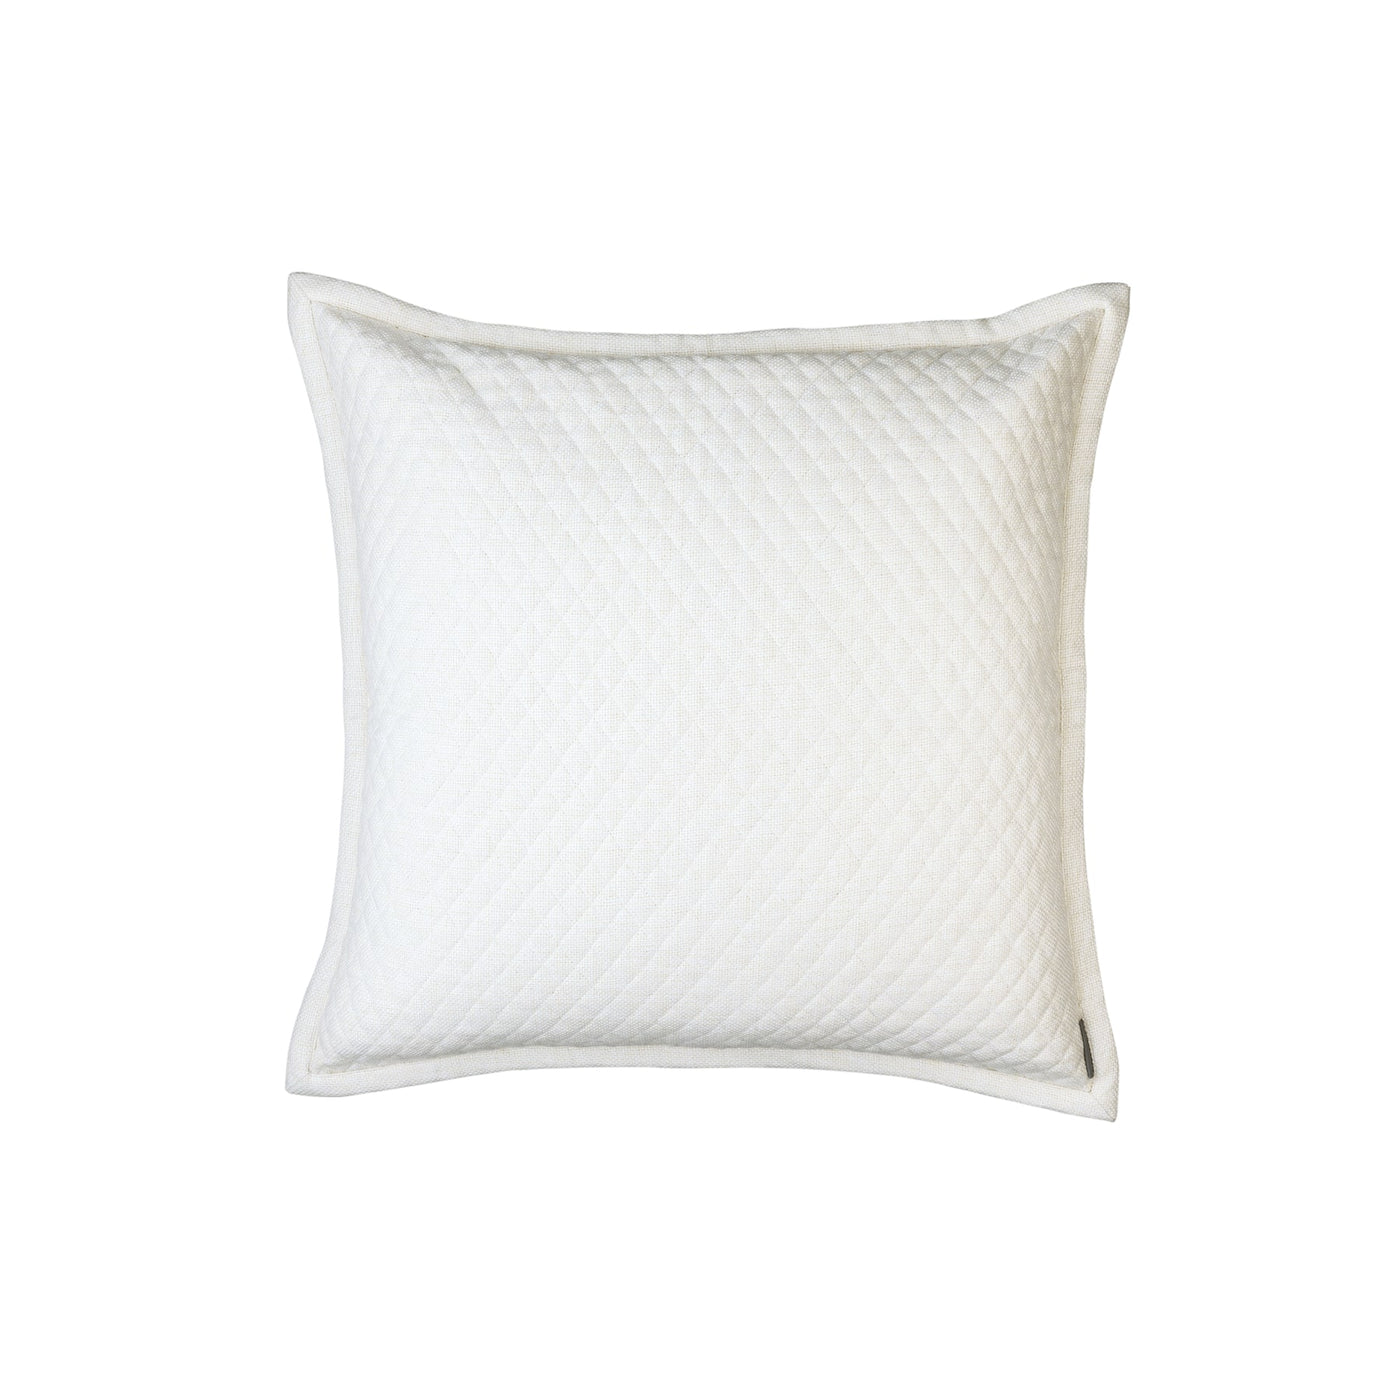 Laurie Quilted Euro Pillow Ivory Basketweave 26X26